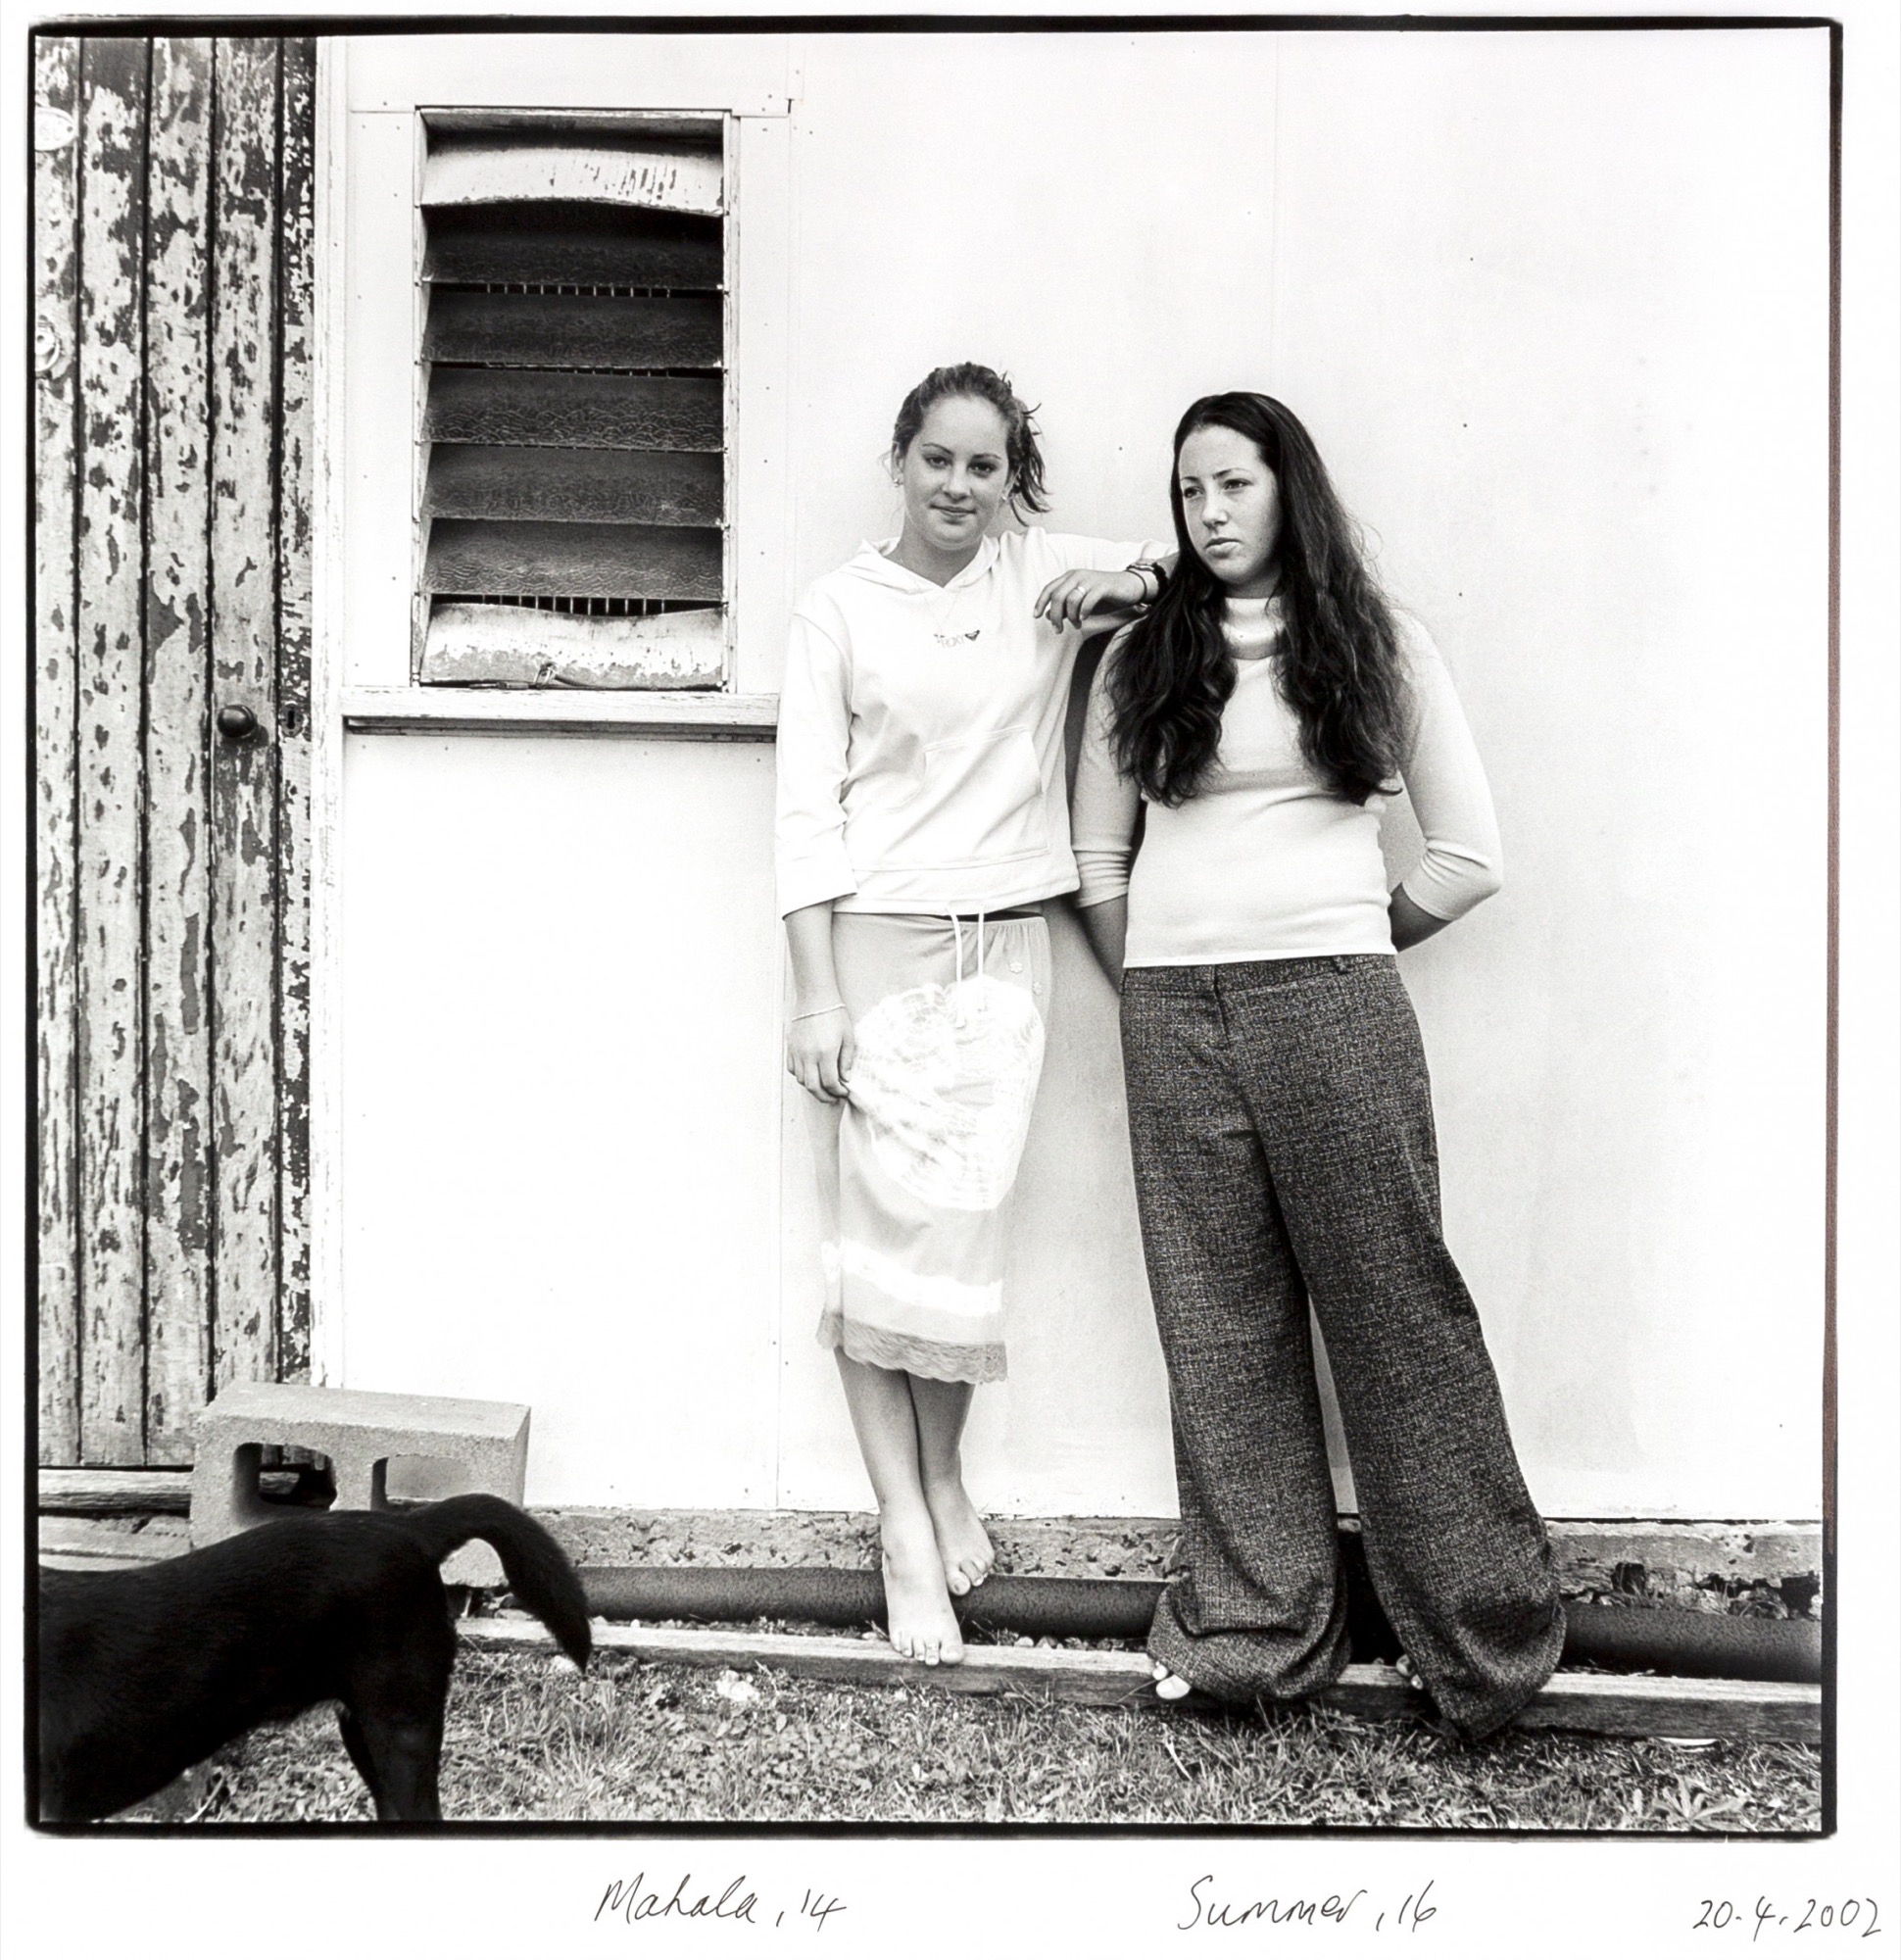 Ruth Maddison, <em>Mahala and Summer</em>, from the series <em>Now a river went out of Eden</em>, 2002, silver gelatin vintage print, 2002, 52.5 x 42.5 cm (image size). Courtesy of the artist and the Centre for Contemporary Photography.